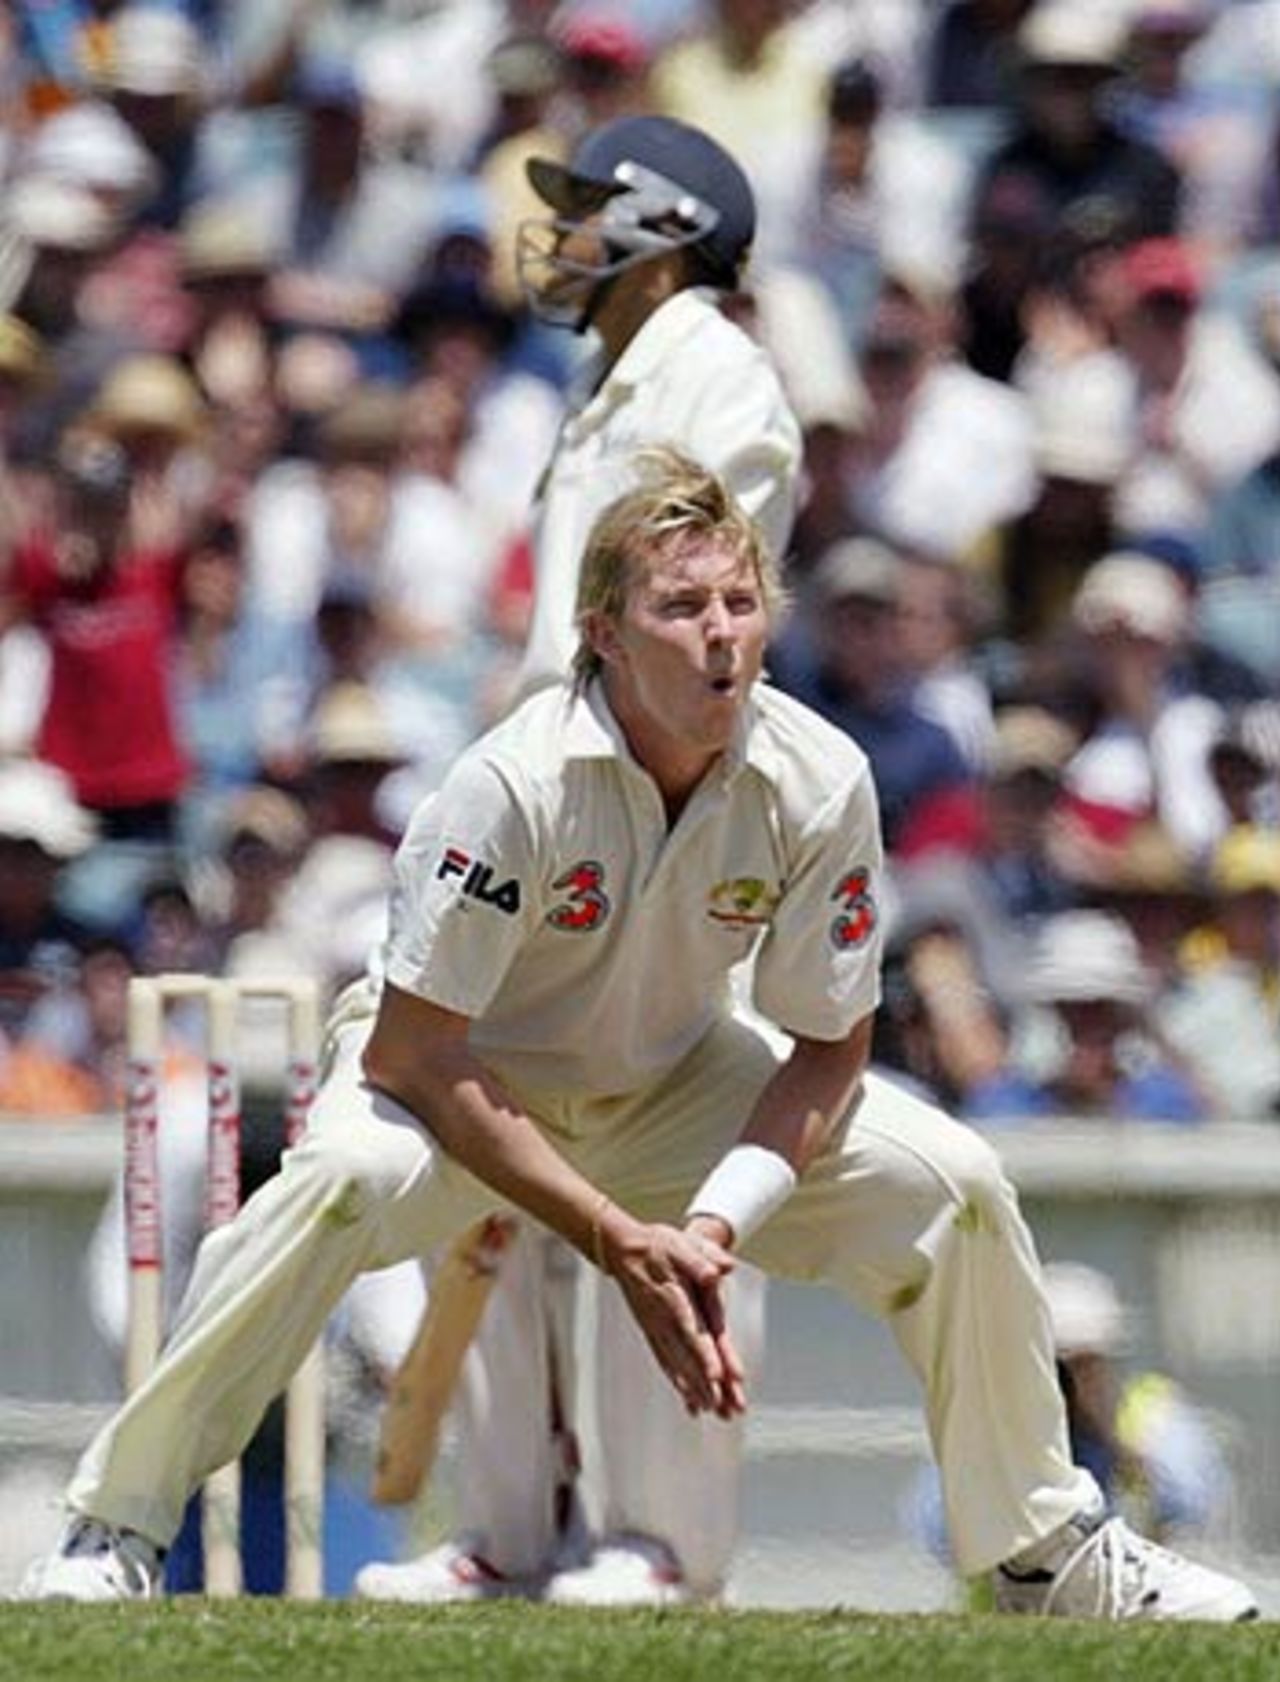 Not out. Brett Lee is disappointed after his appeal against Akash Chopra is turned down, Australia v India, 3rd Test, Melbourne, 1st day, December 26, 2003